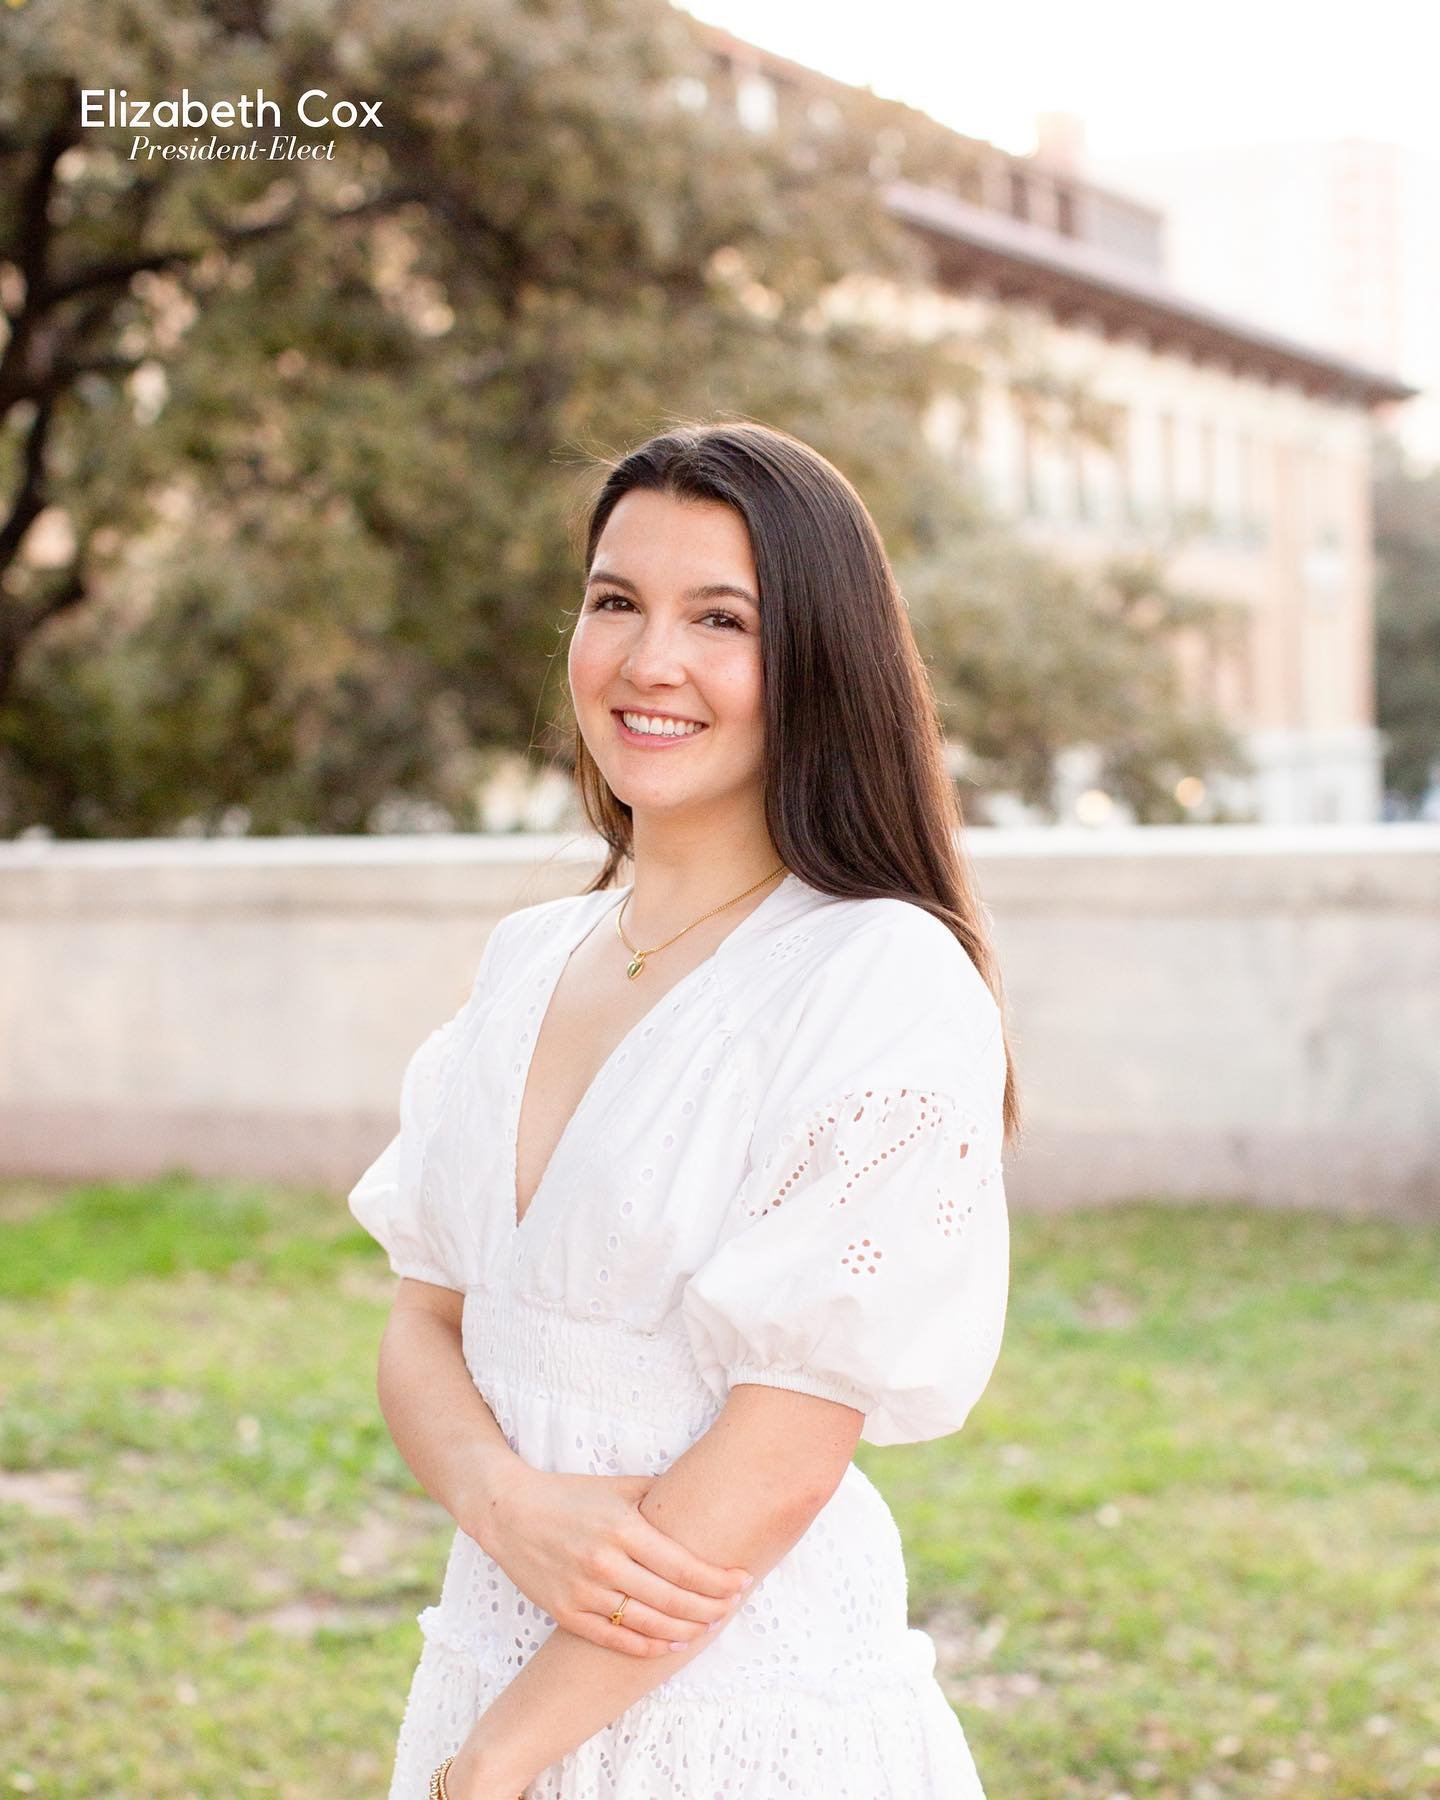 Meet Elizabeth Cox, President-Elect!

Hometown: Houston, Texas
Major: Communication and Leadership
Minor: Business

&ldquo;I&rsquo;m honored and excited to serve as President-Elect of the University Panhellenic Council! My goal is to encourage women 